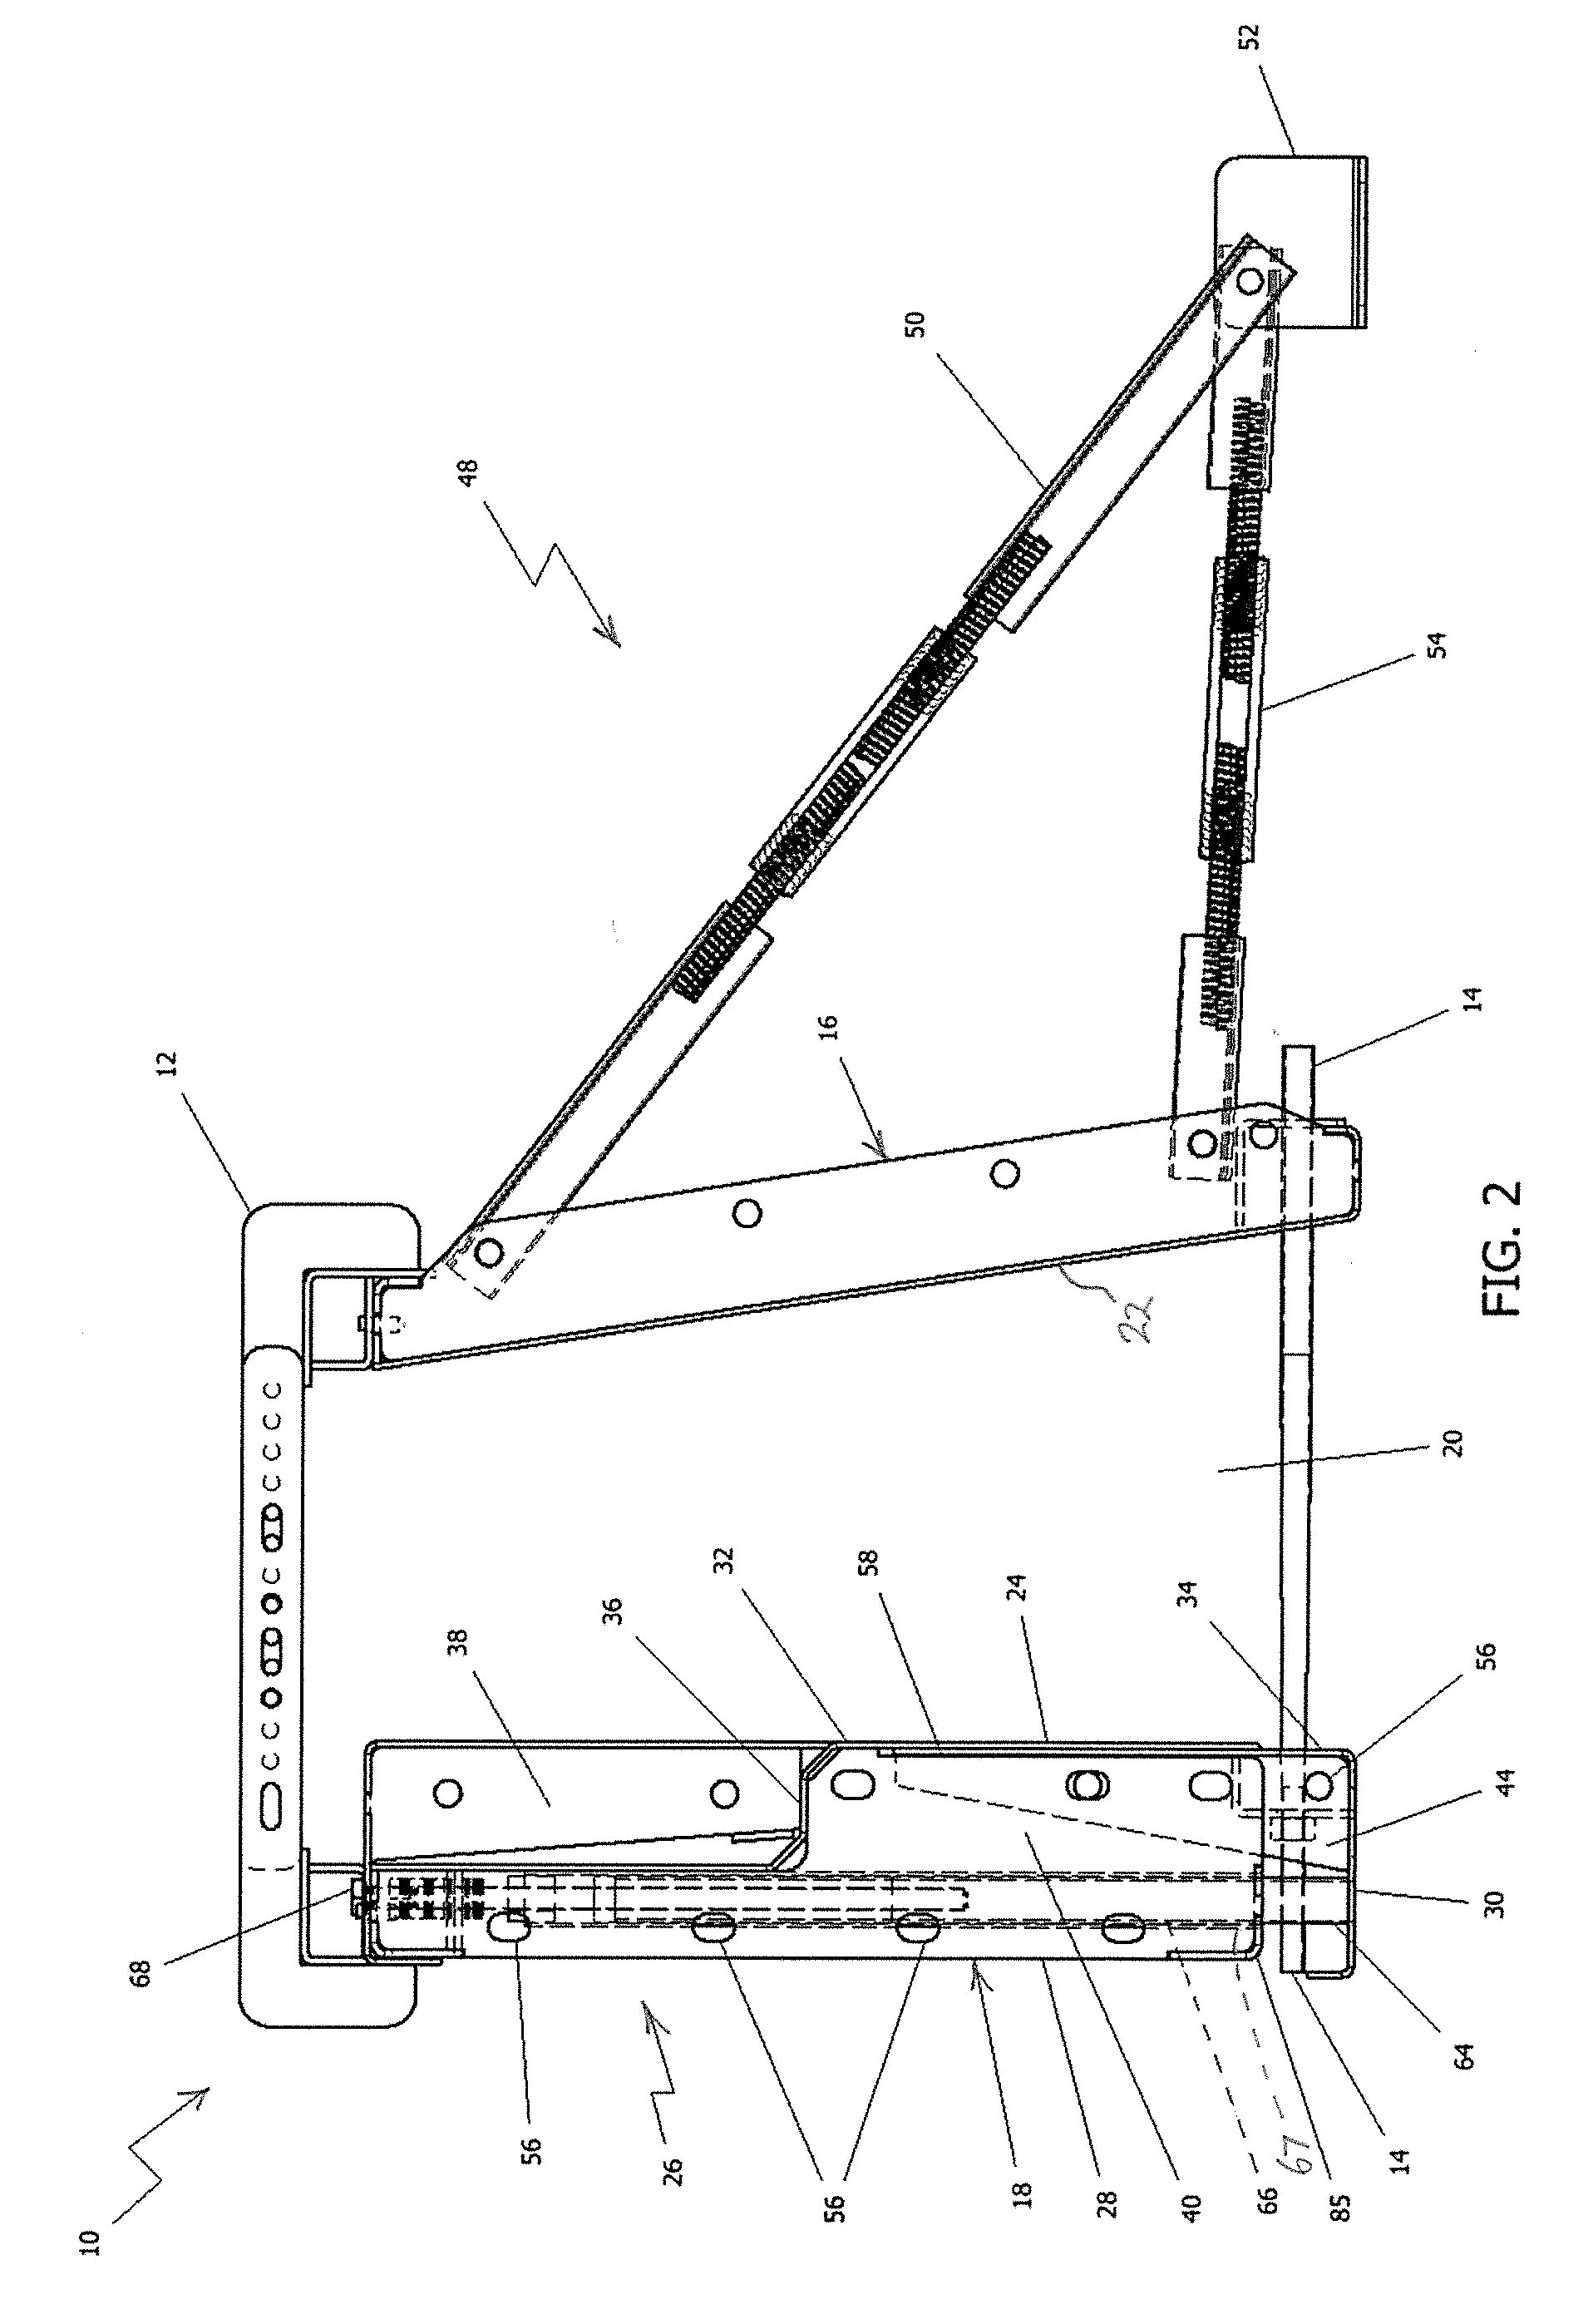 Height adjustable concrete form assembly